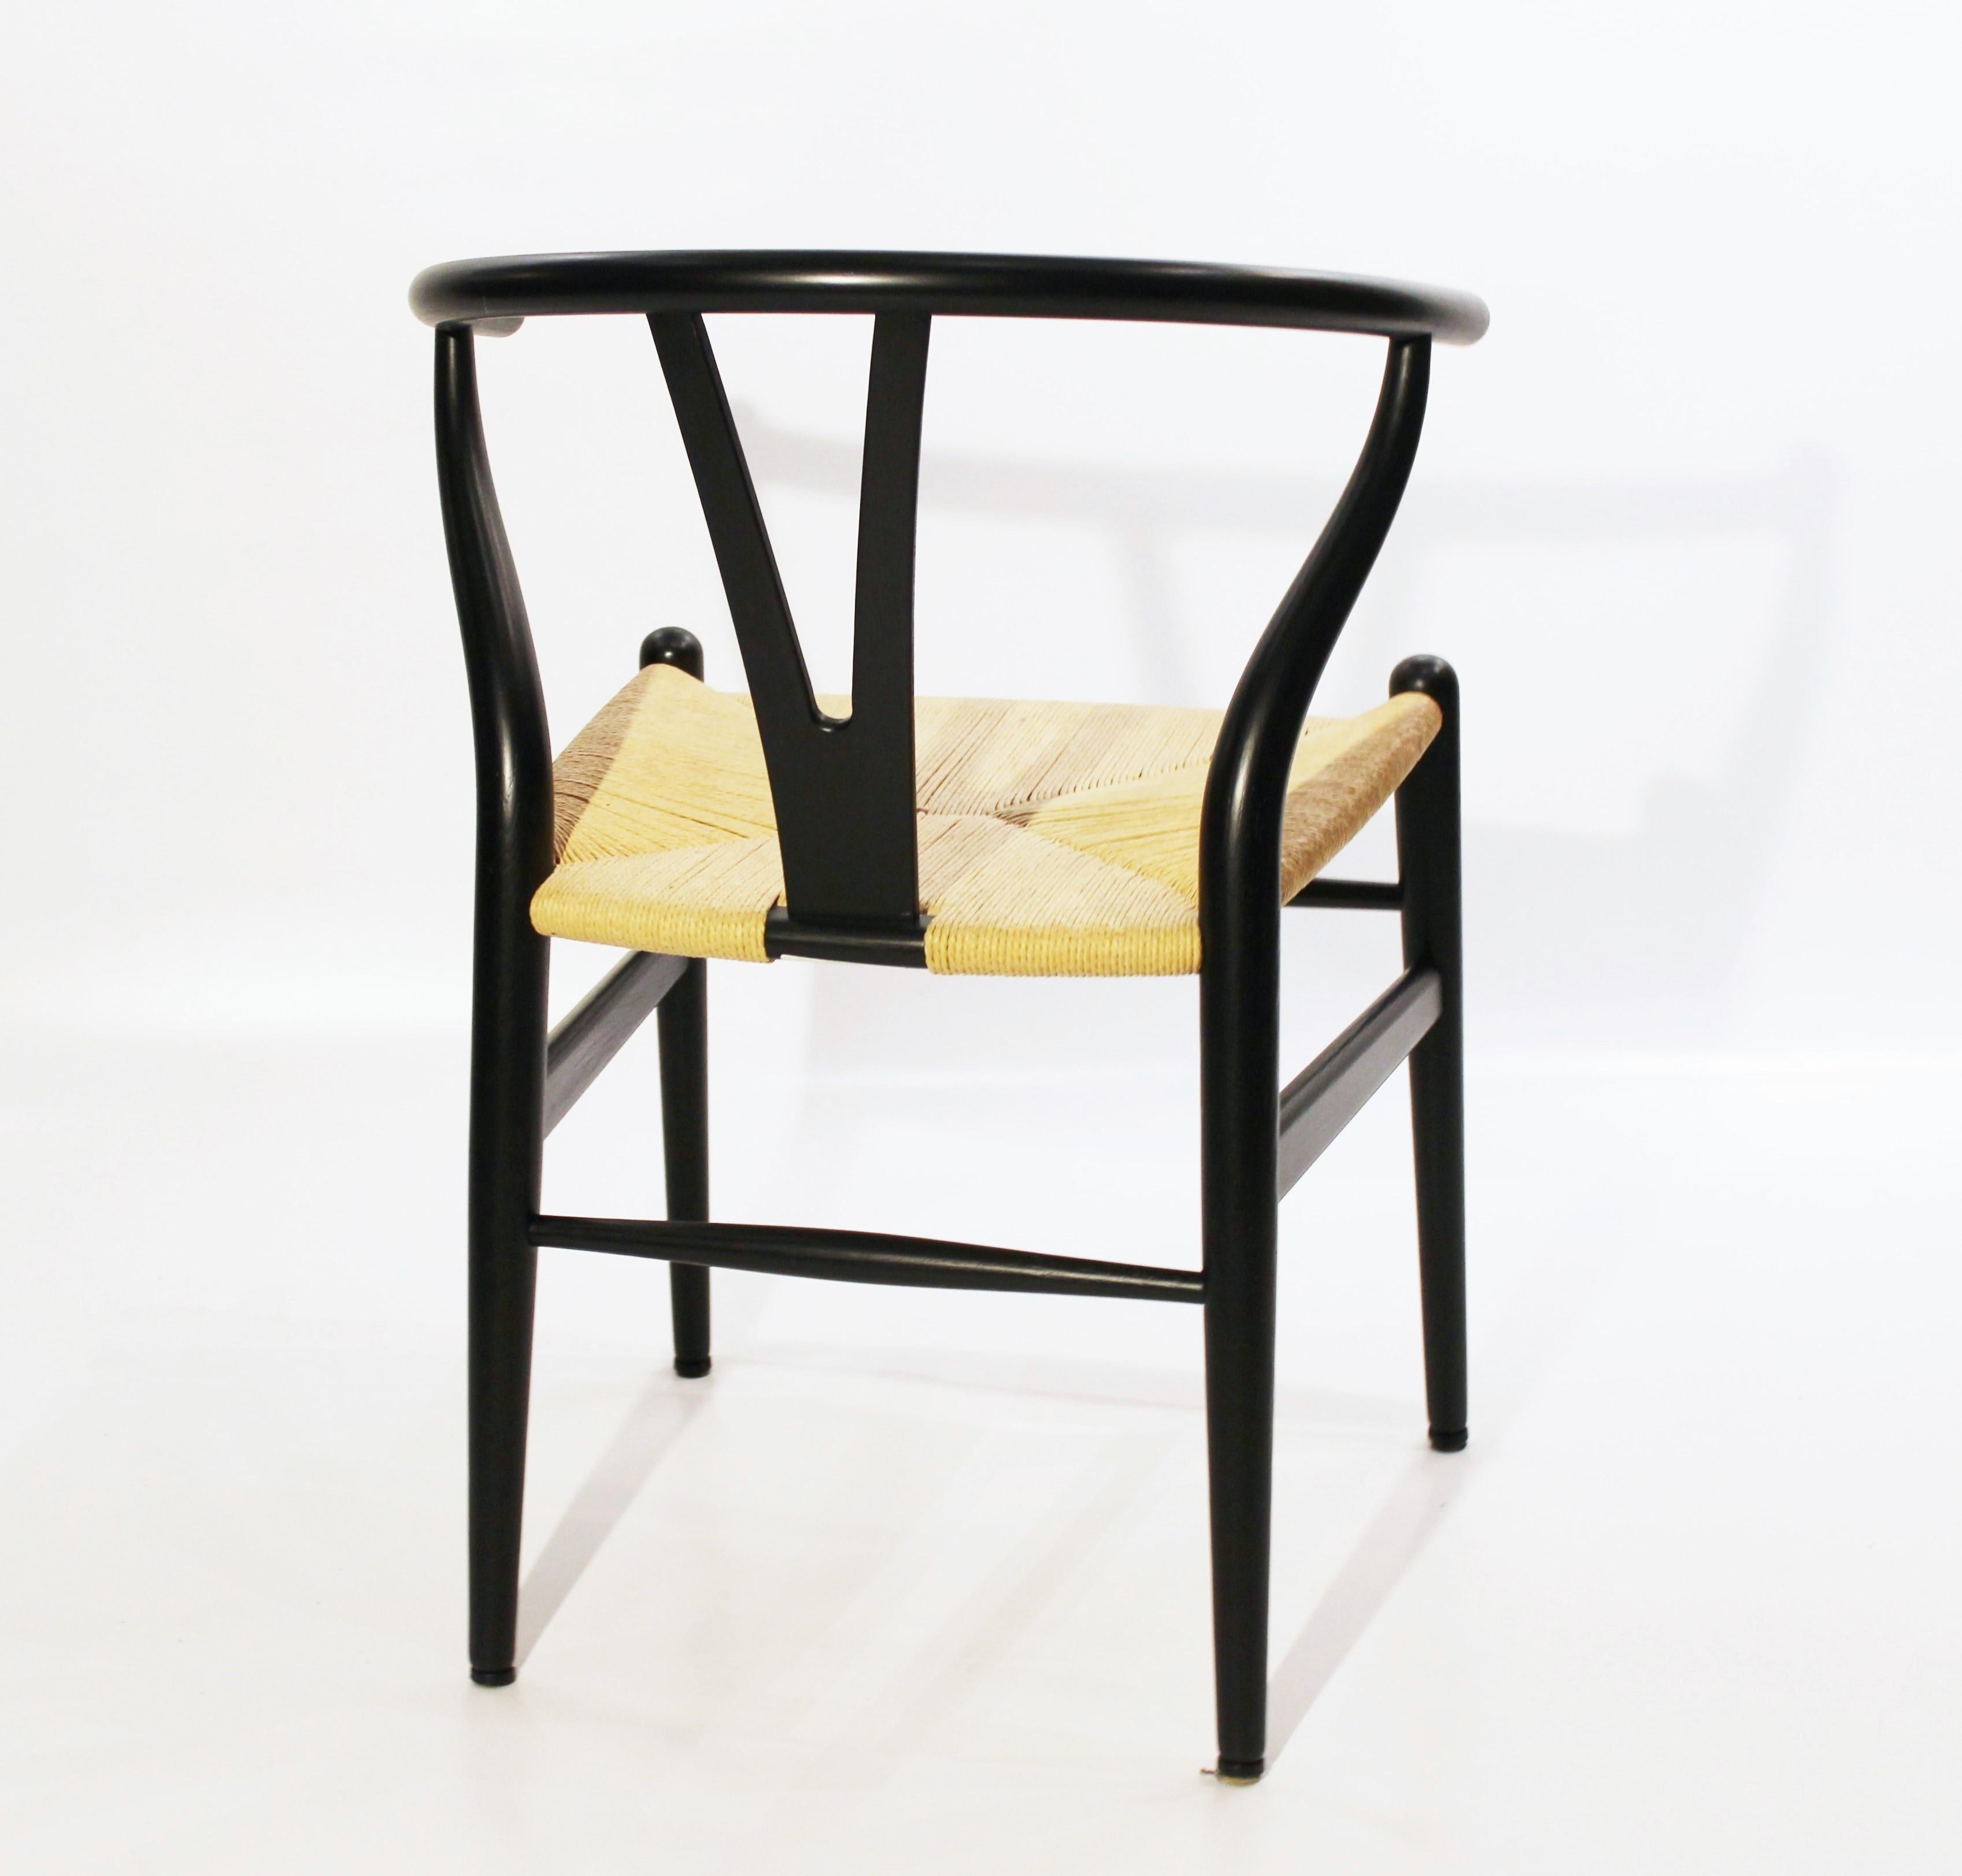 The Wishbone chairs, model CH24, designed by Hans J. Wegner and manufactured by Carl Hansen & Son, are exemplary pieces of Scandinavian Modern furniture. Crafted from black painted wood and featuring paper cord seating, these chairs showcase